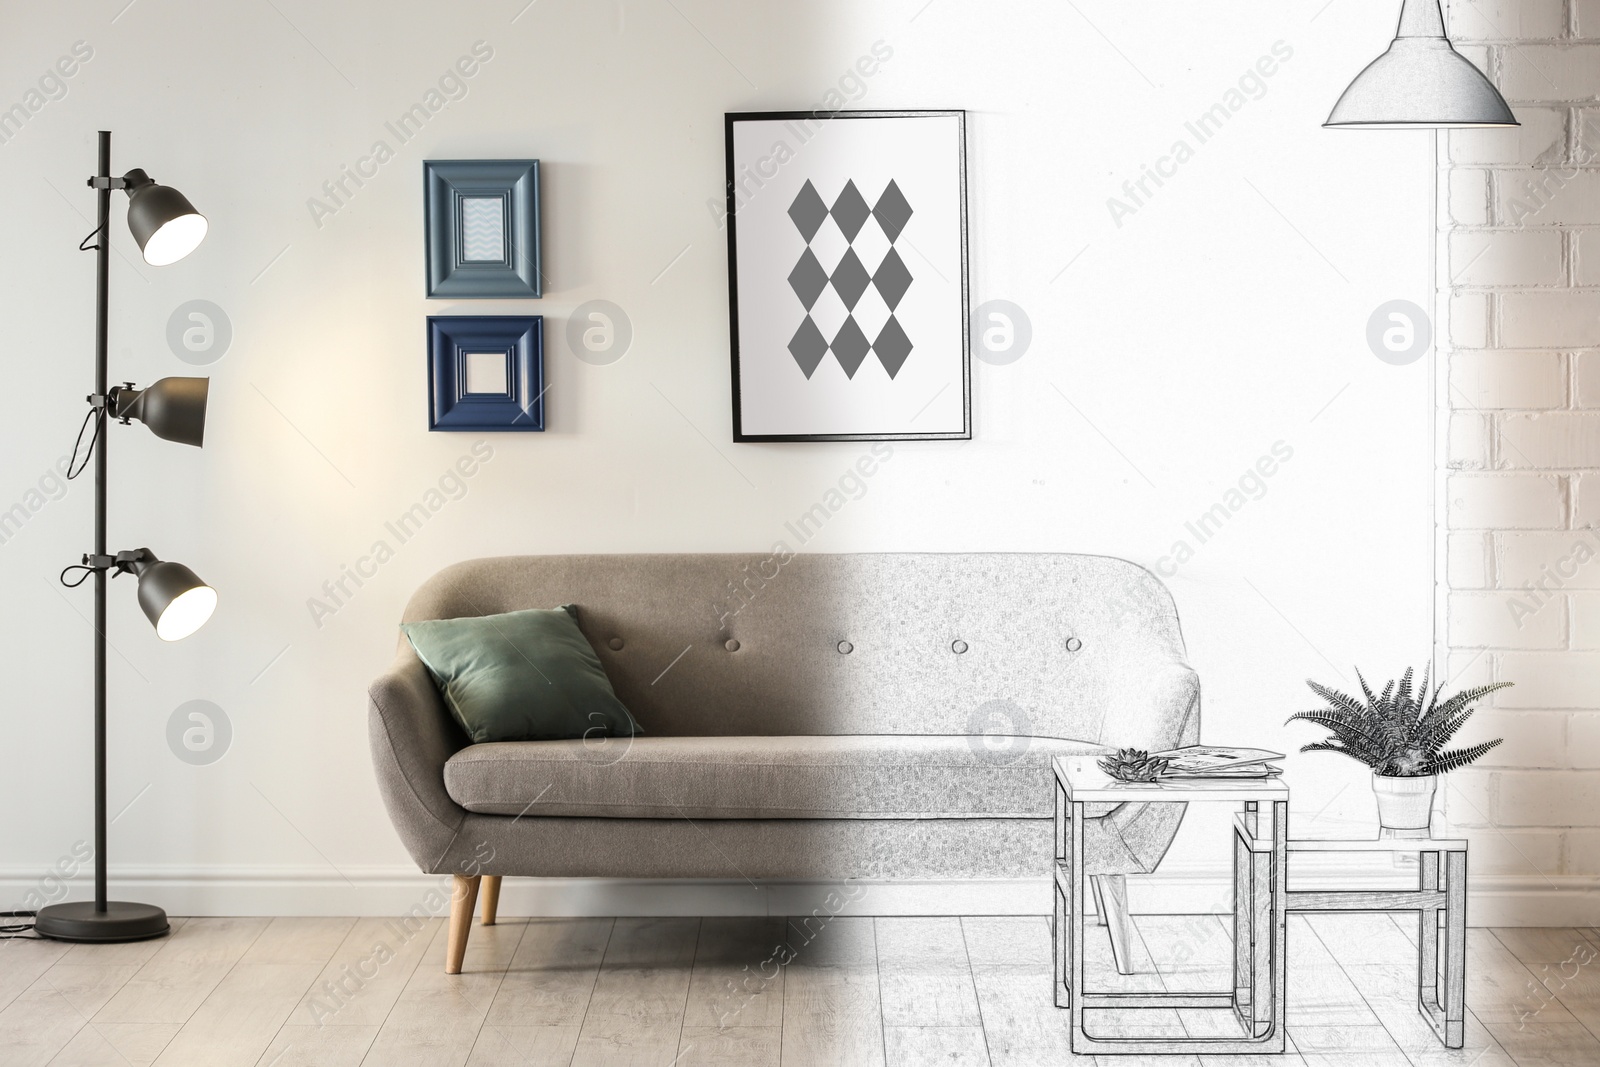 Image of Room with modern lamps and comfortable sofa. Illustrated interior design